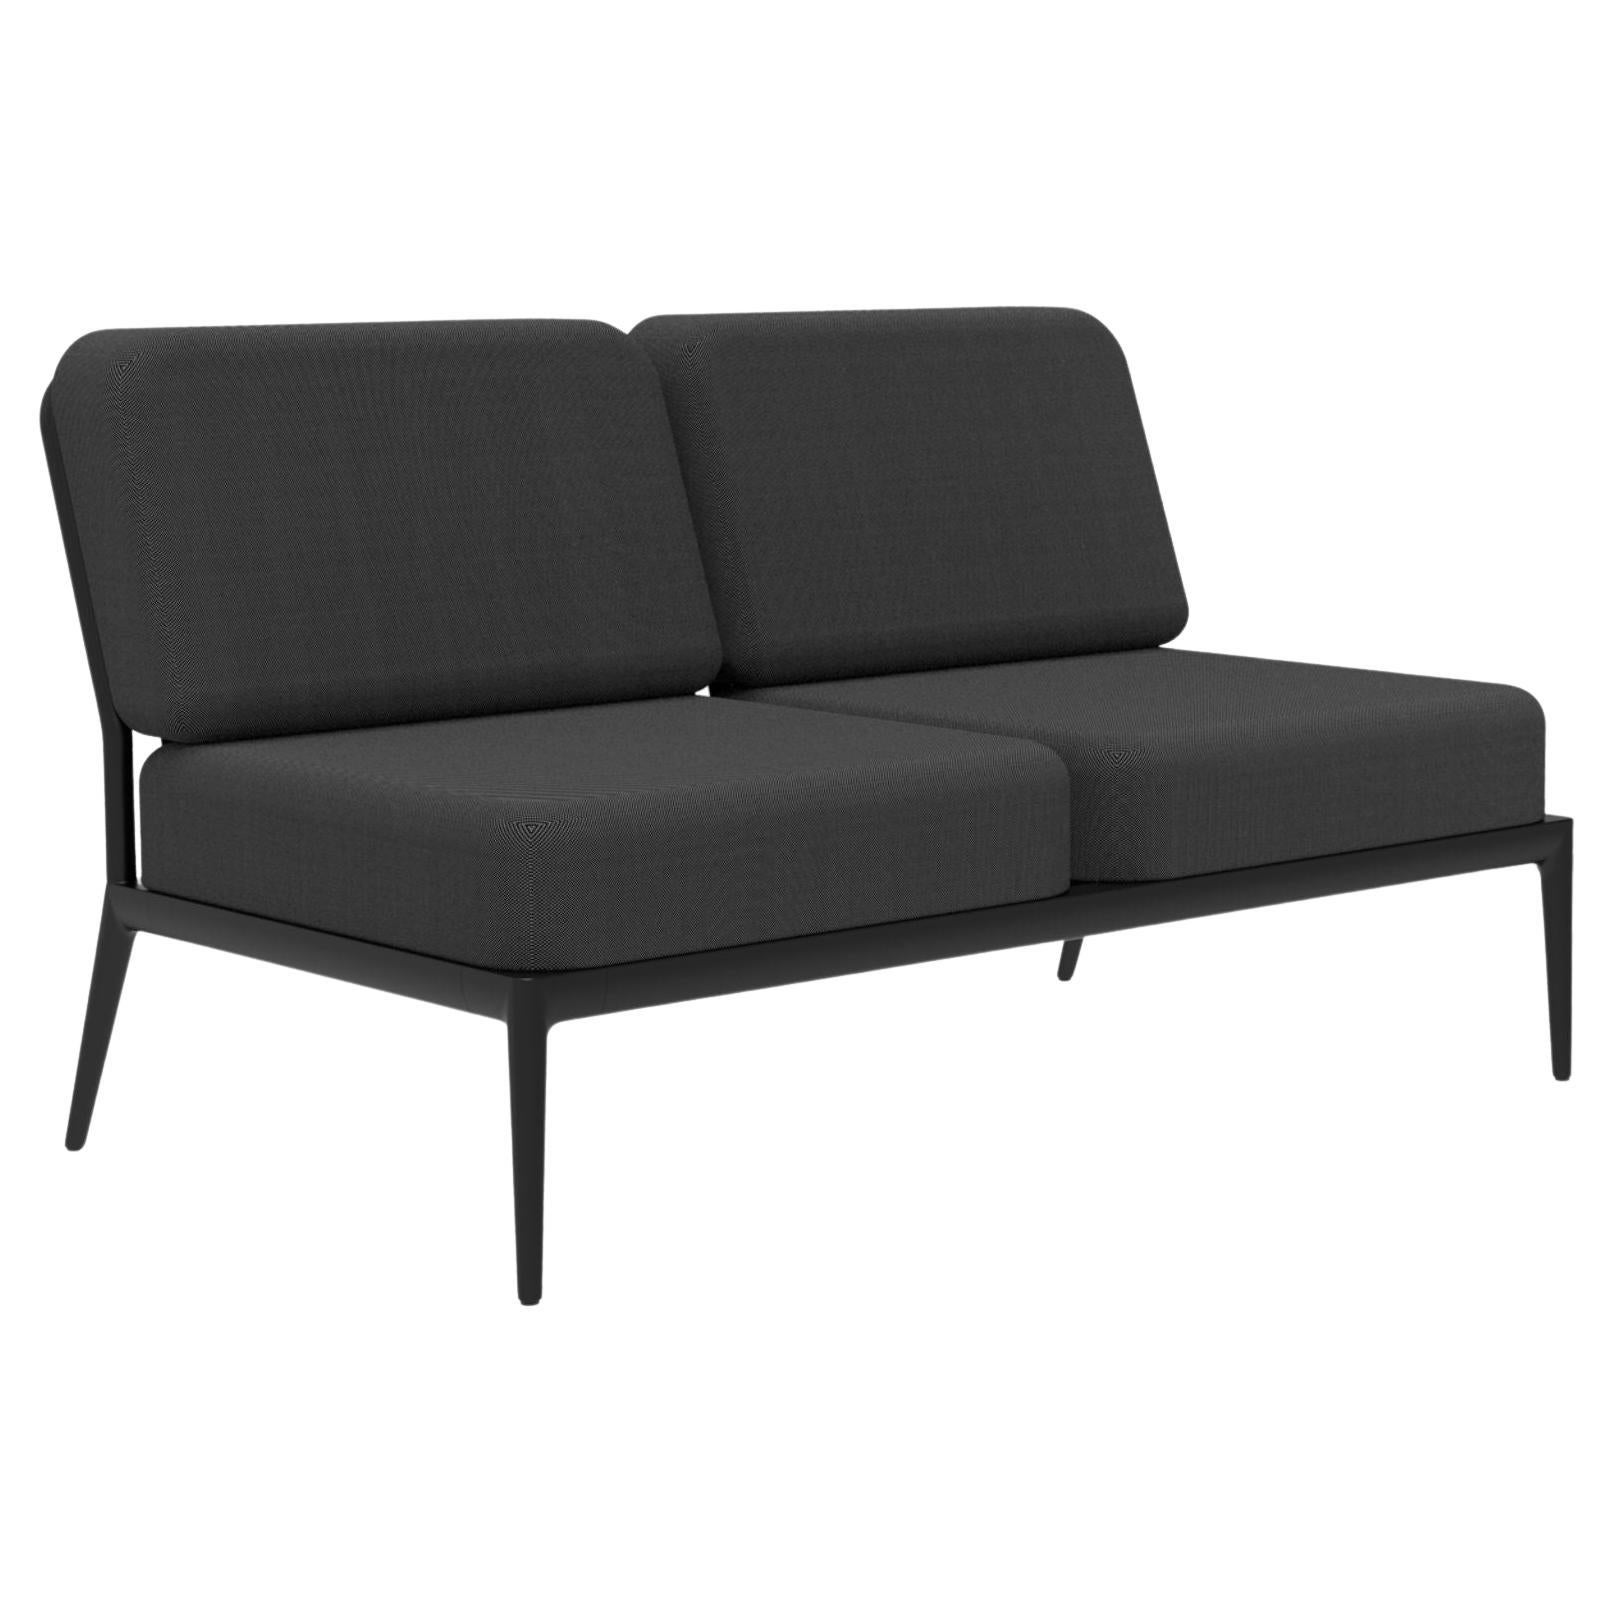 Ribbons Black Double Central Modular Sofa by Mowee For Sale